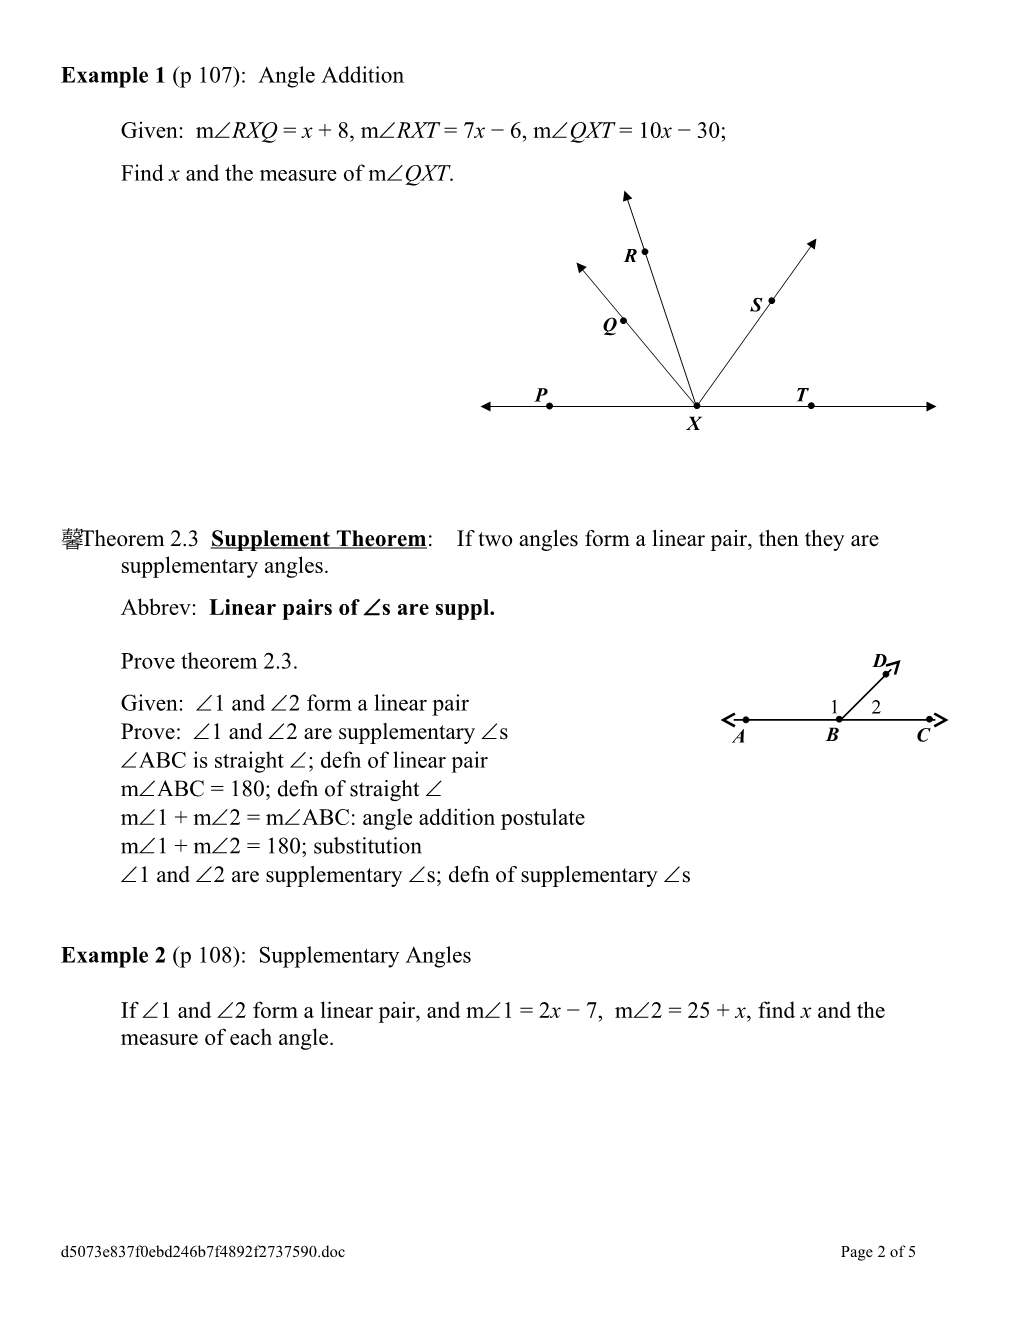 Objective: Solve Problems and Write Geometric Proofs Involving Angles